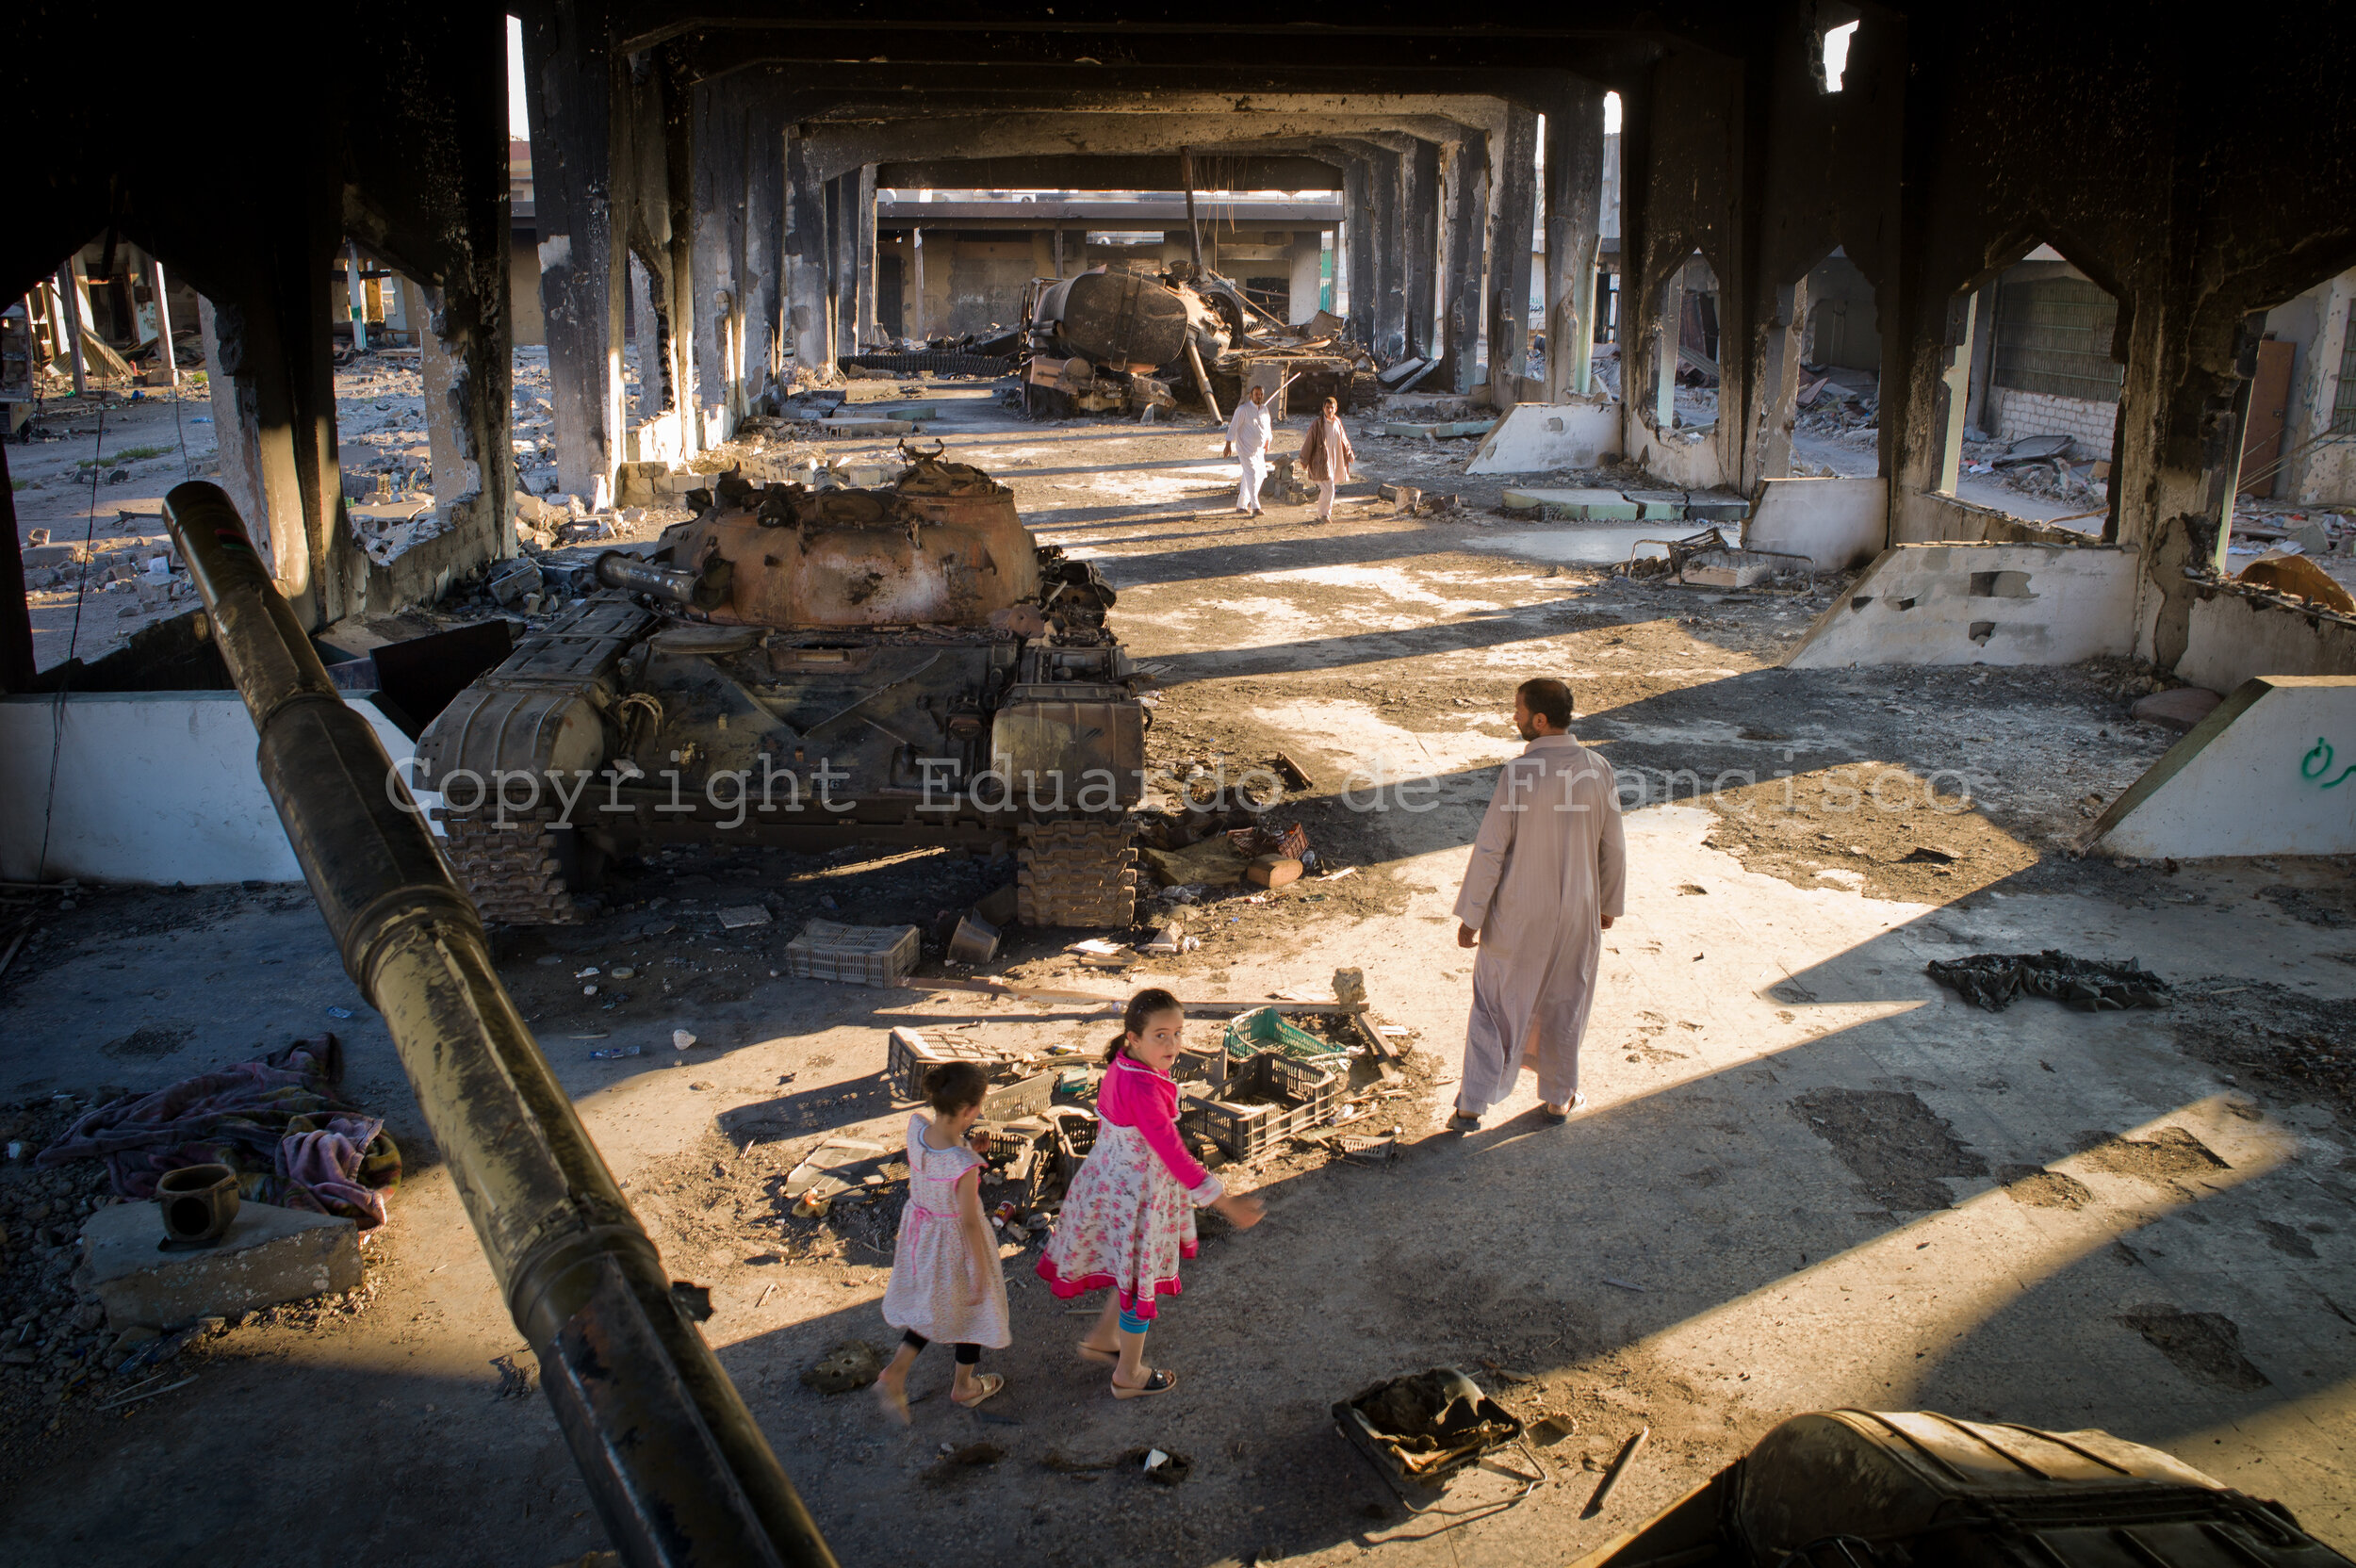  Misrata's families watch a group of tanks used by the infamous Khamis Brigade (commanded by one of Gadaffi's sons) to bomb civilian buildings in the center of Misrata. This building (a market before the war) was later bombed by NATO to destroy a tot